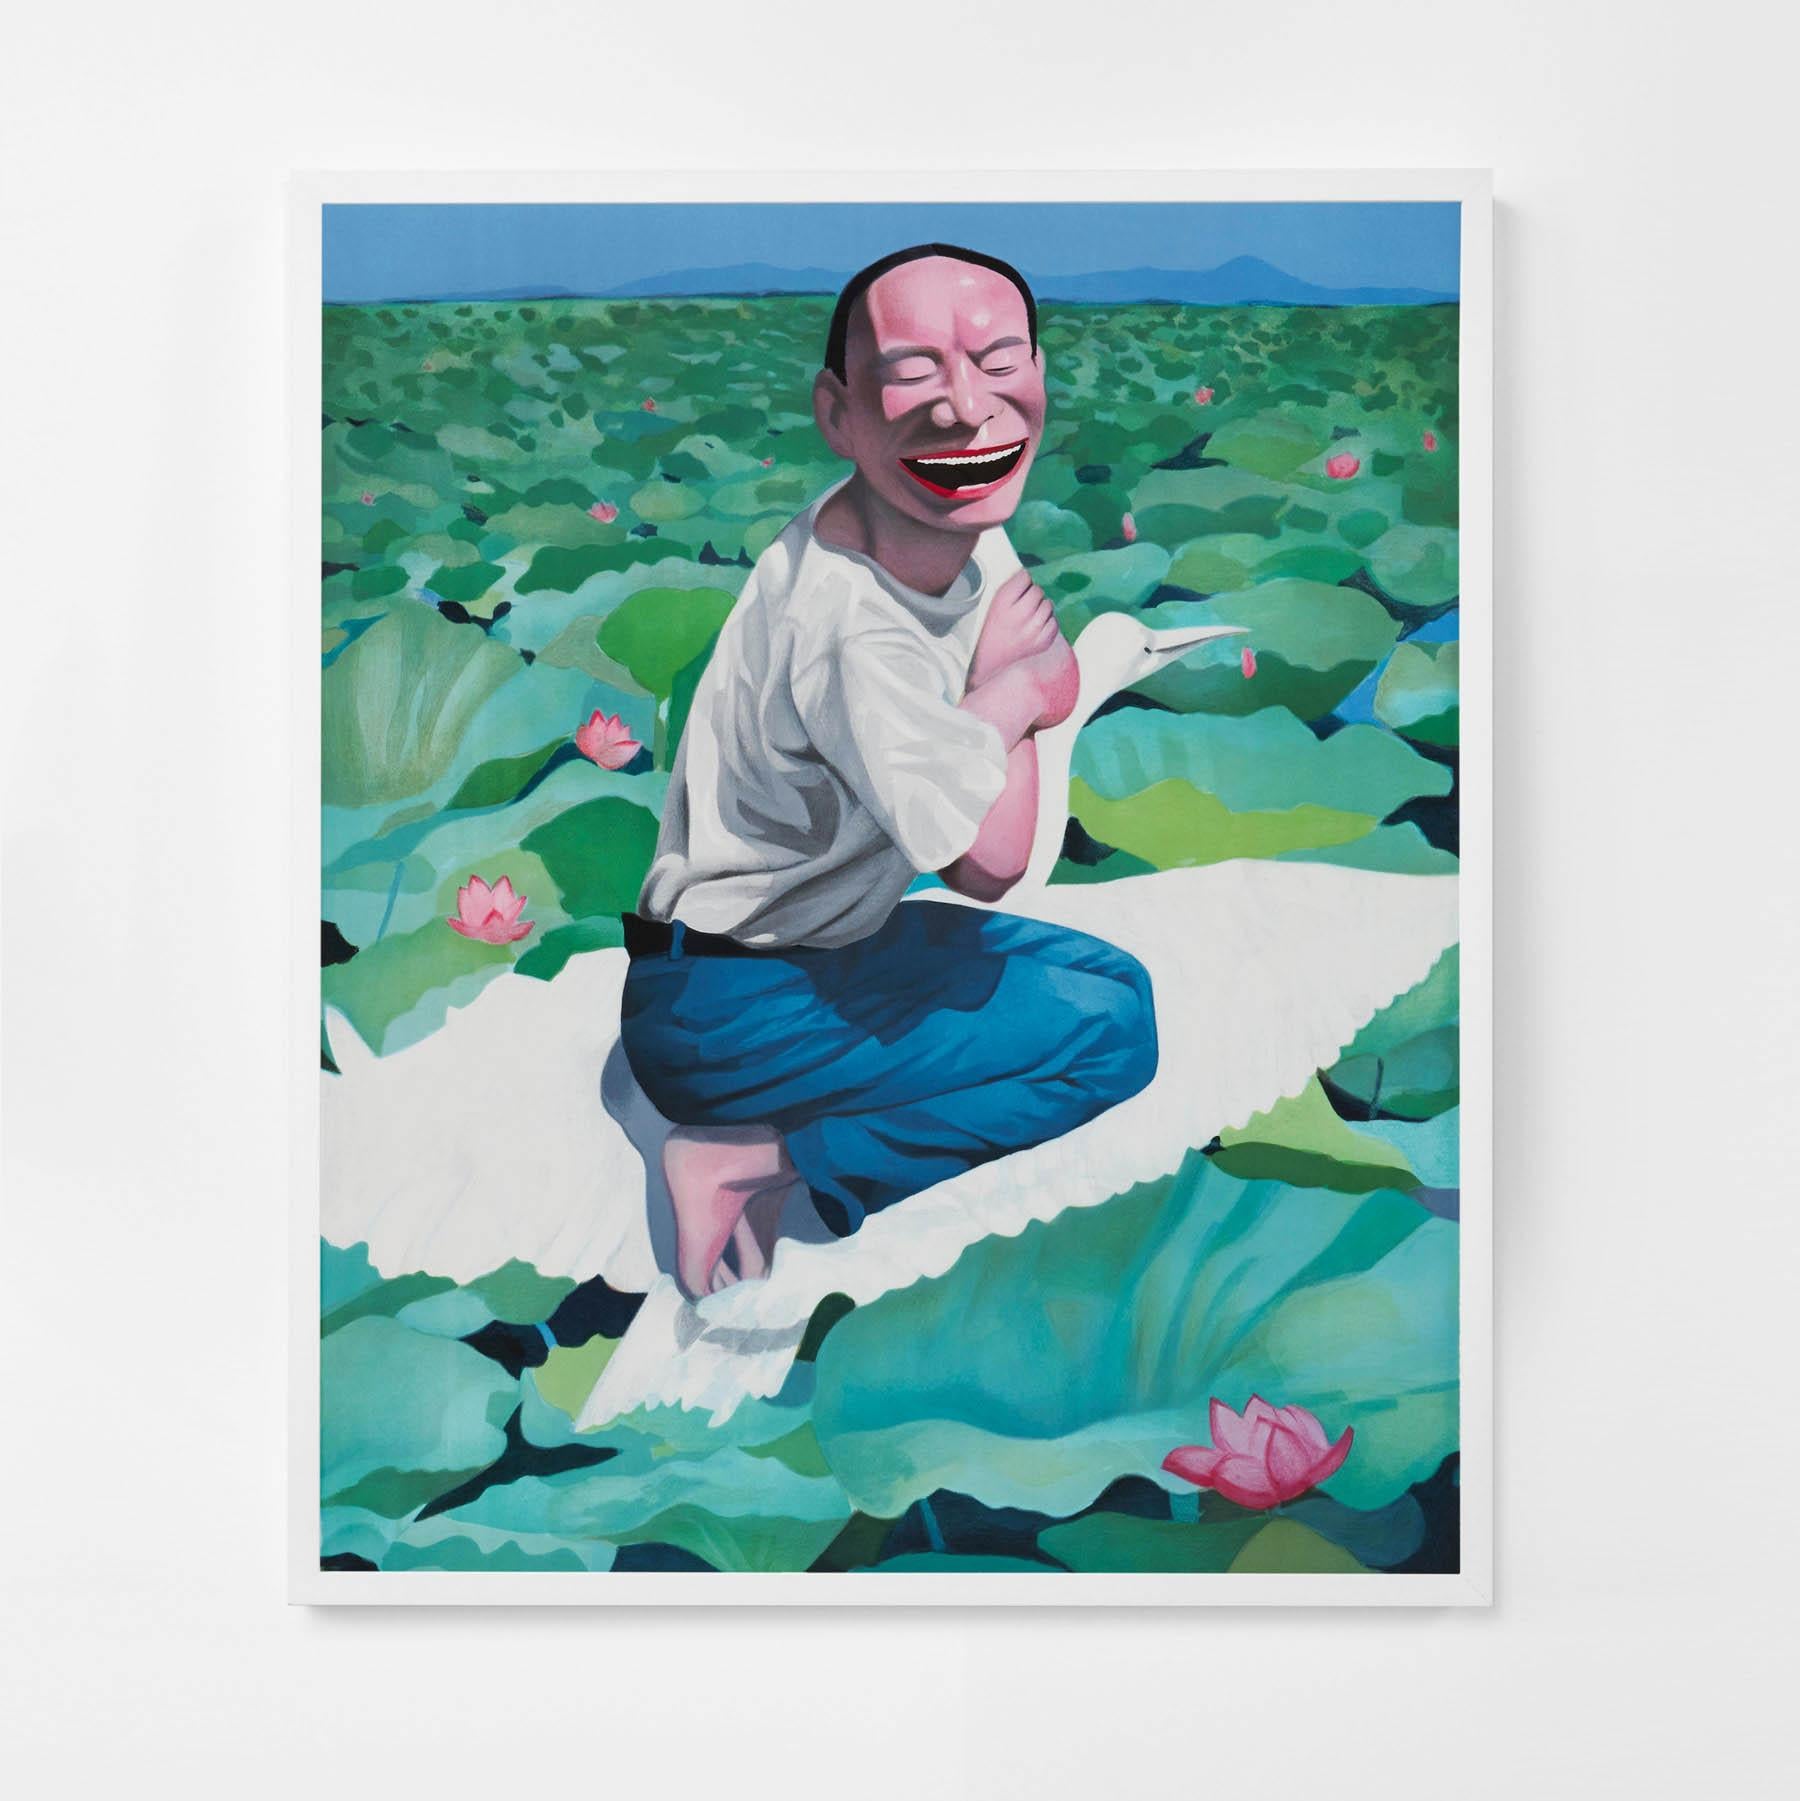 Yue Minjun, Lotus Pool
Lithograph in color on wove paper “BFK Rives”
Edition of 130
120 x 80 cm (47.2 x 31.4 in)
Stamped Signature, numbered in Roman numerals
In mint condition, as acquired from the publisher

PLEASE NOTE: Edition numbers could vary